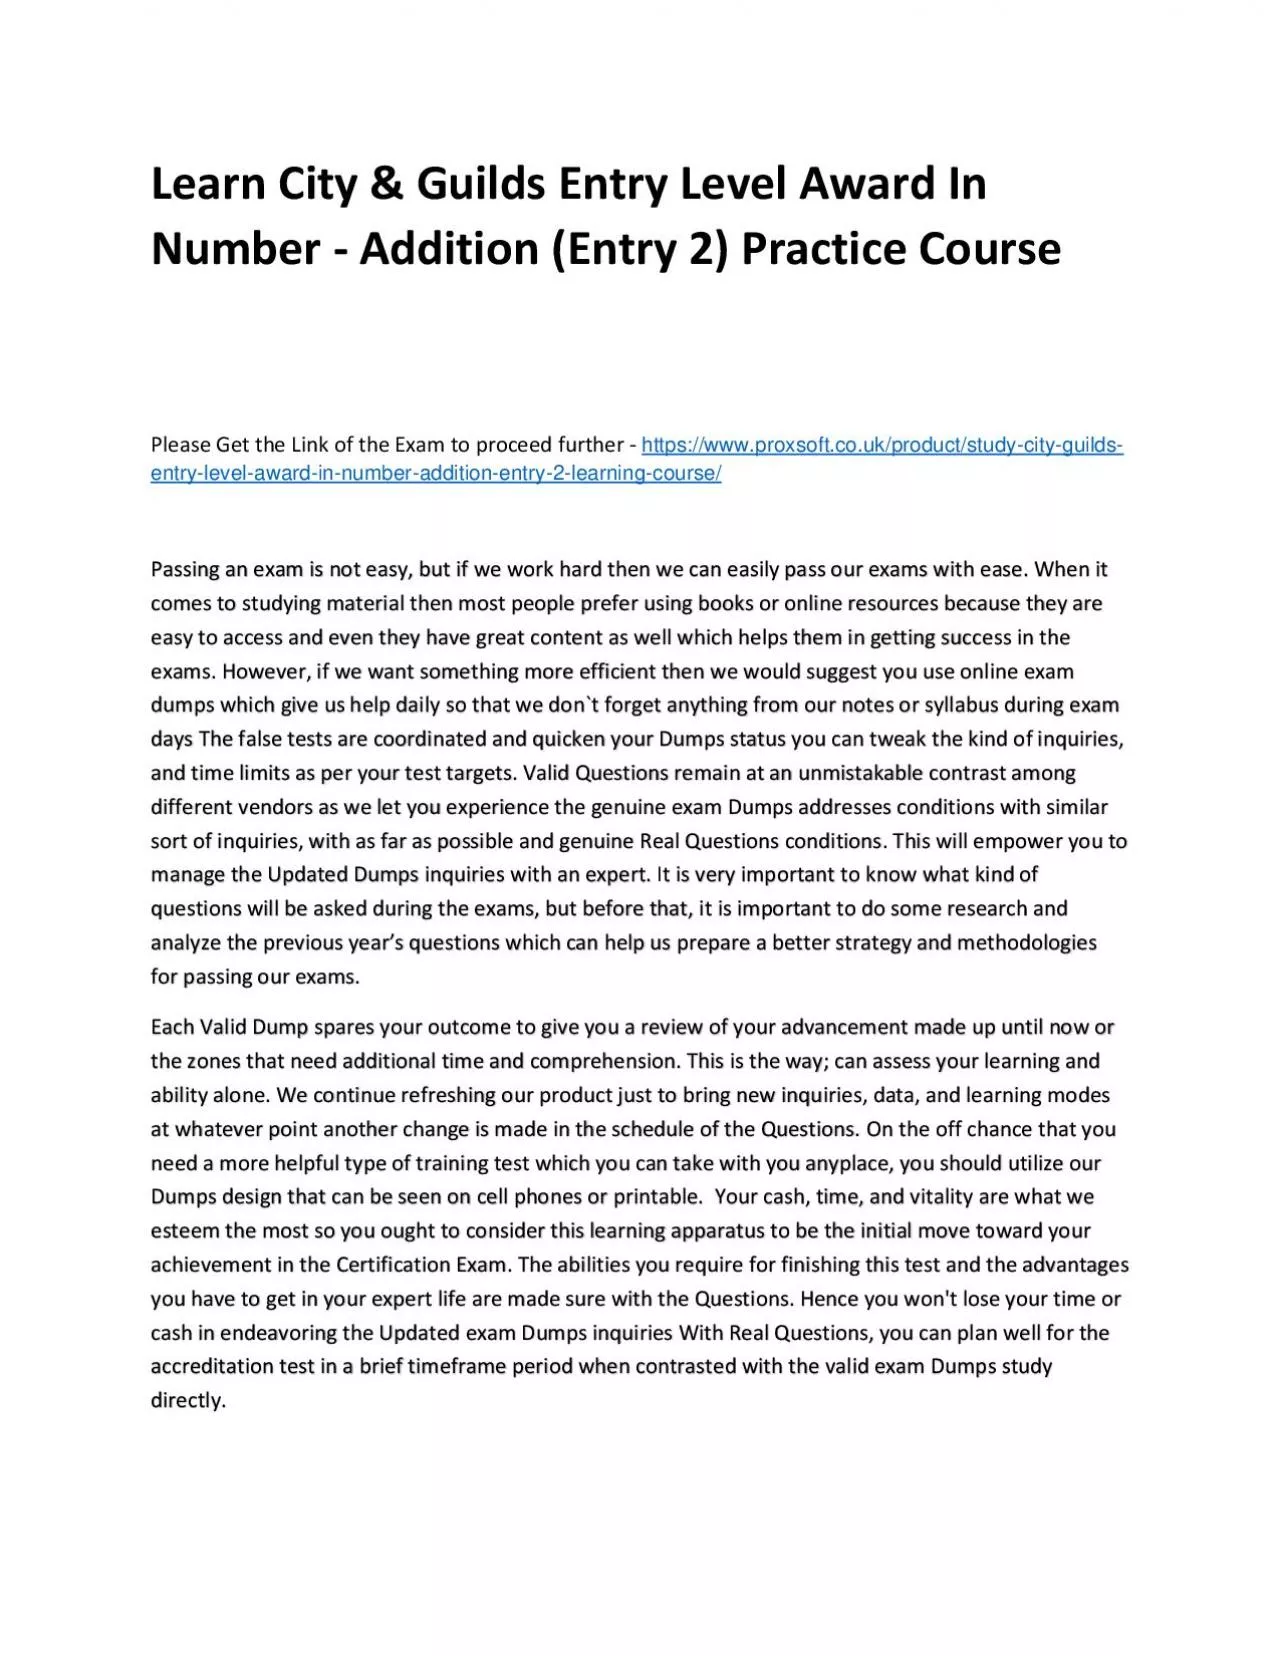 Learn City & Guilds Entry Level Award In Number - Addition (Entry 2) Practice Course